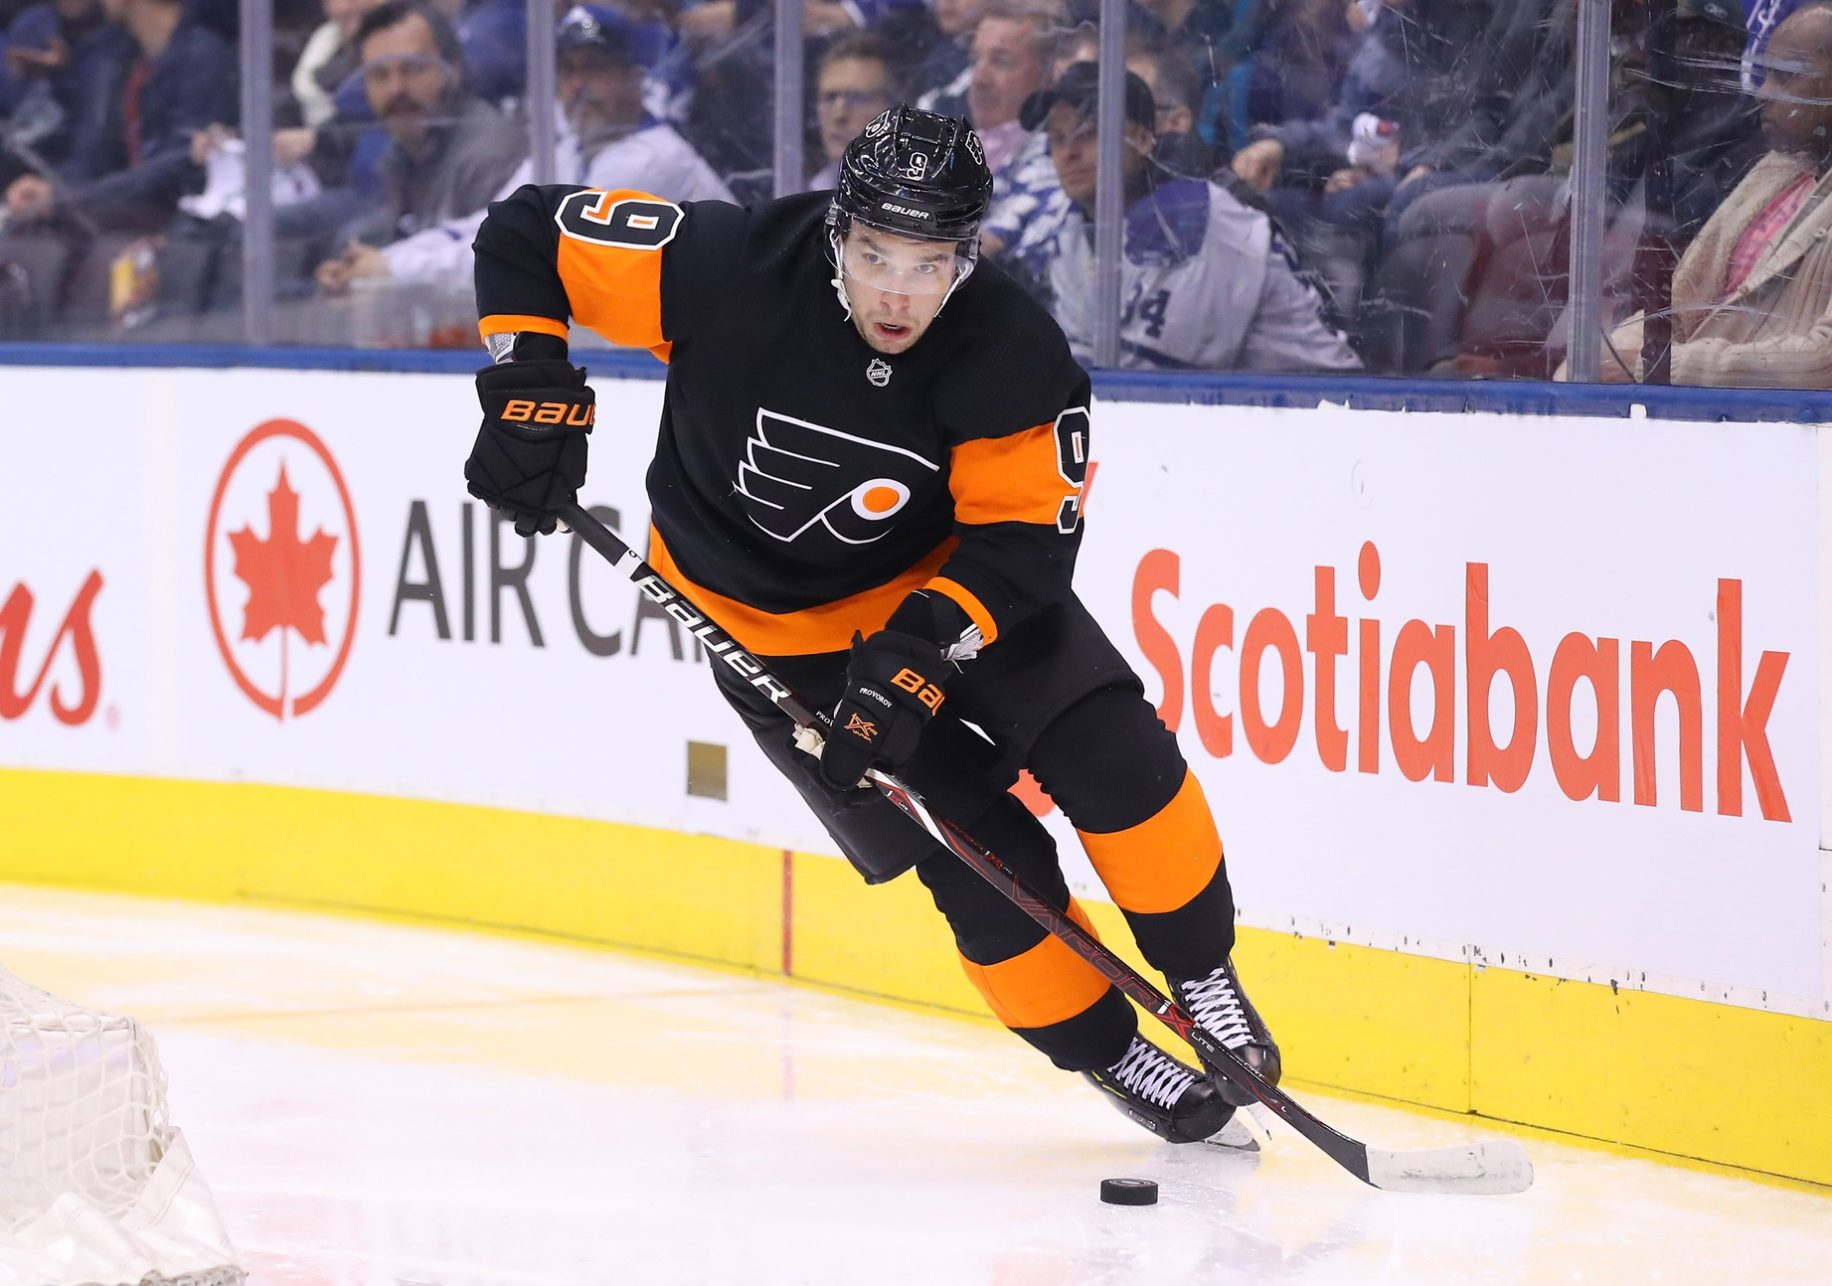 Ivan Provorov Trade Shows Danny Briere has a Clear Plan to Build a Winner